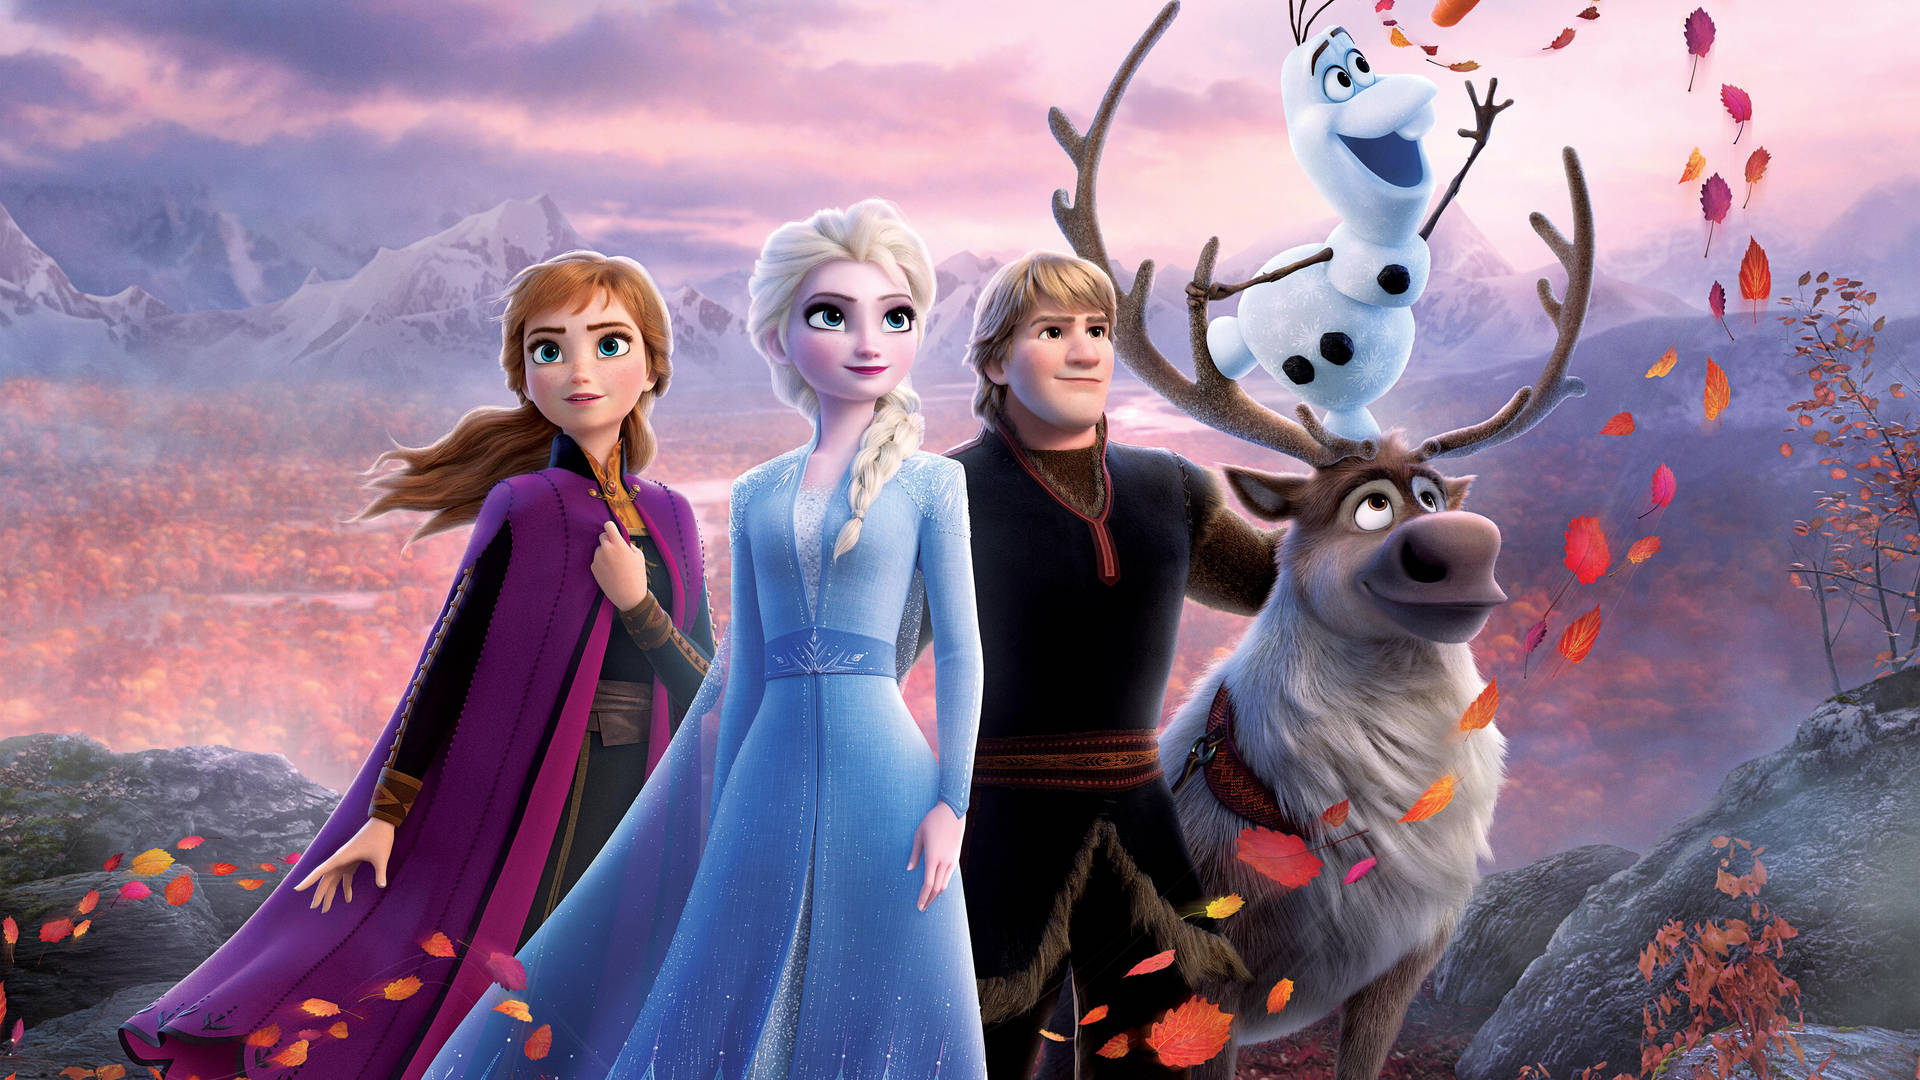 Elsa And Anna With Friends Wallpaper